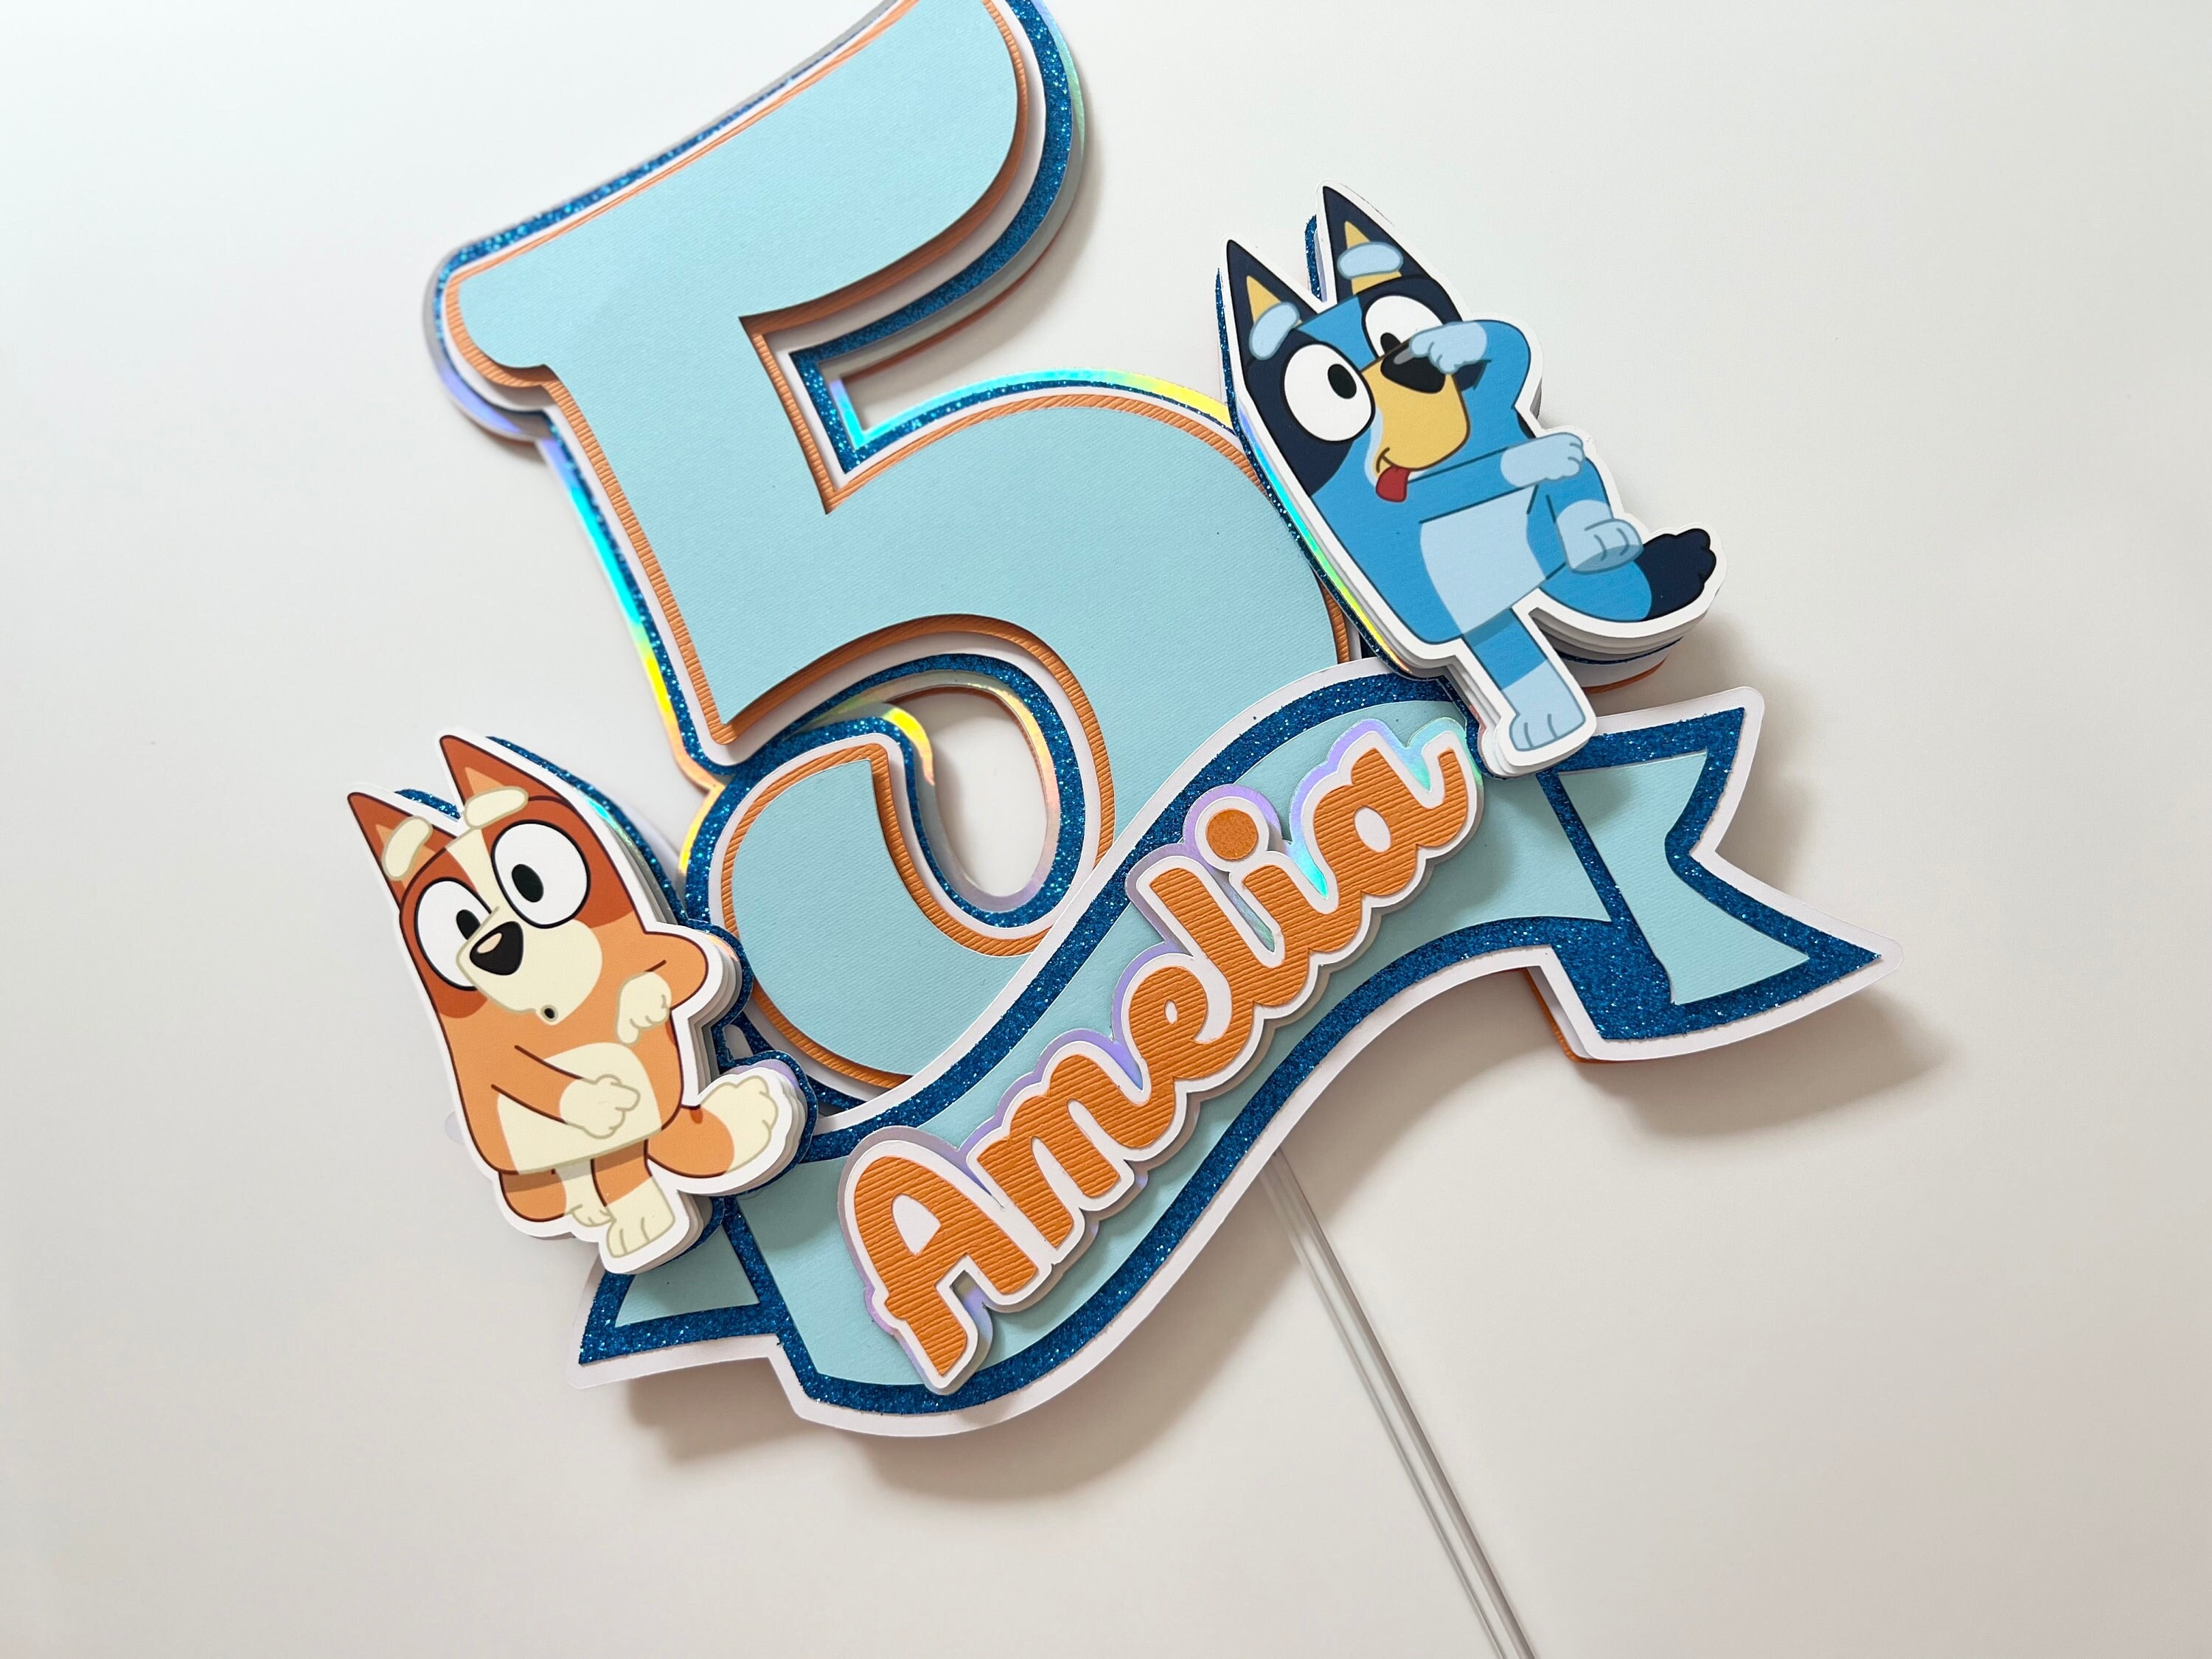 Bluey Birthday Party Balloon Garland / Balloon Arch for Bluey Birthday  Decorations W/ FREE Birthday Banner Template Bluey Party Supplies 